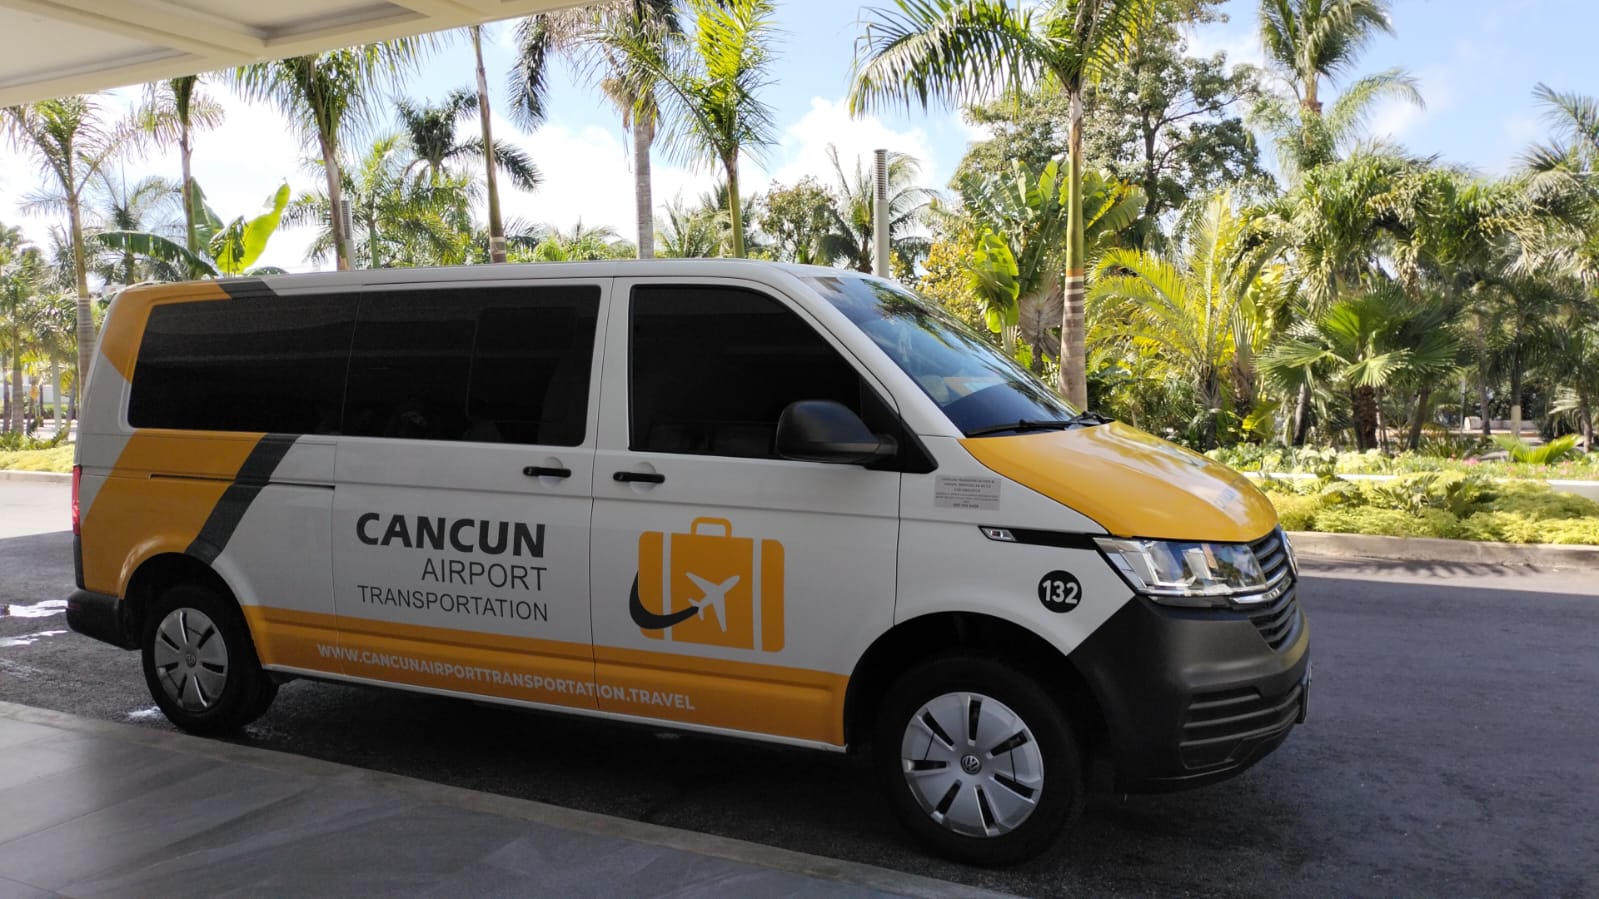 Cancun All Inclusive Transportation with Cancun Airport Transportation